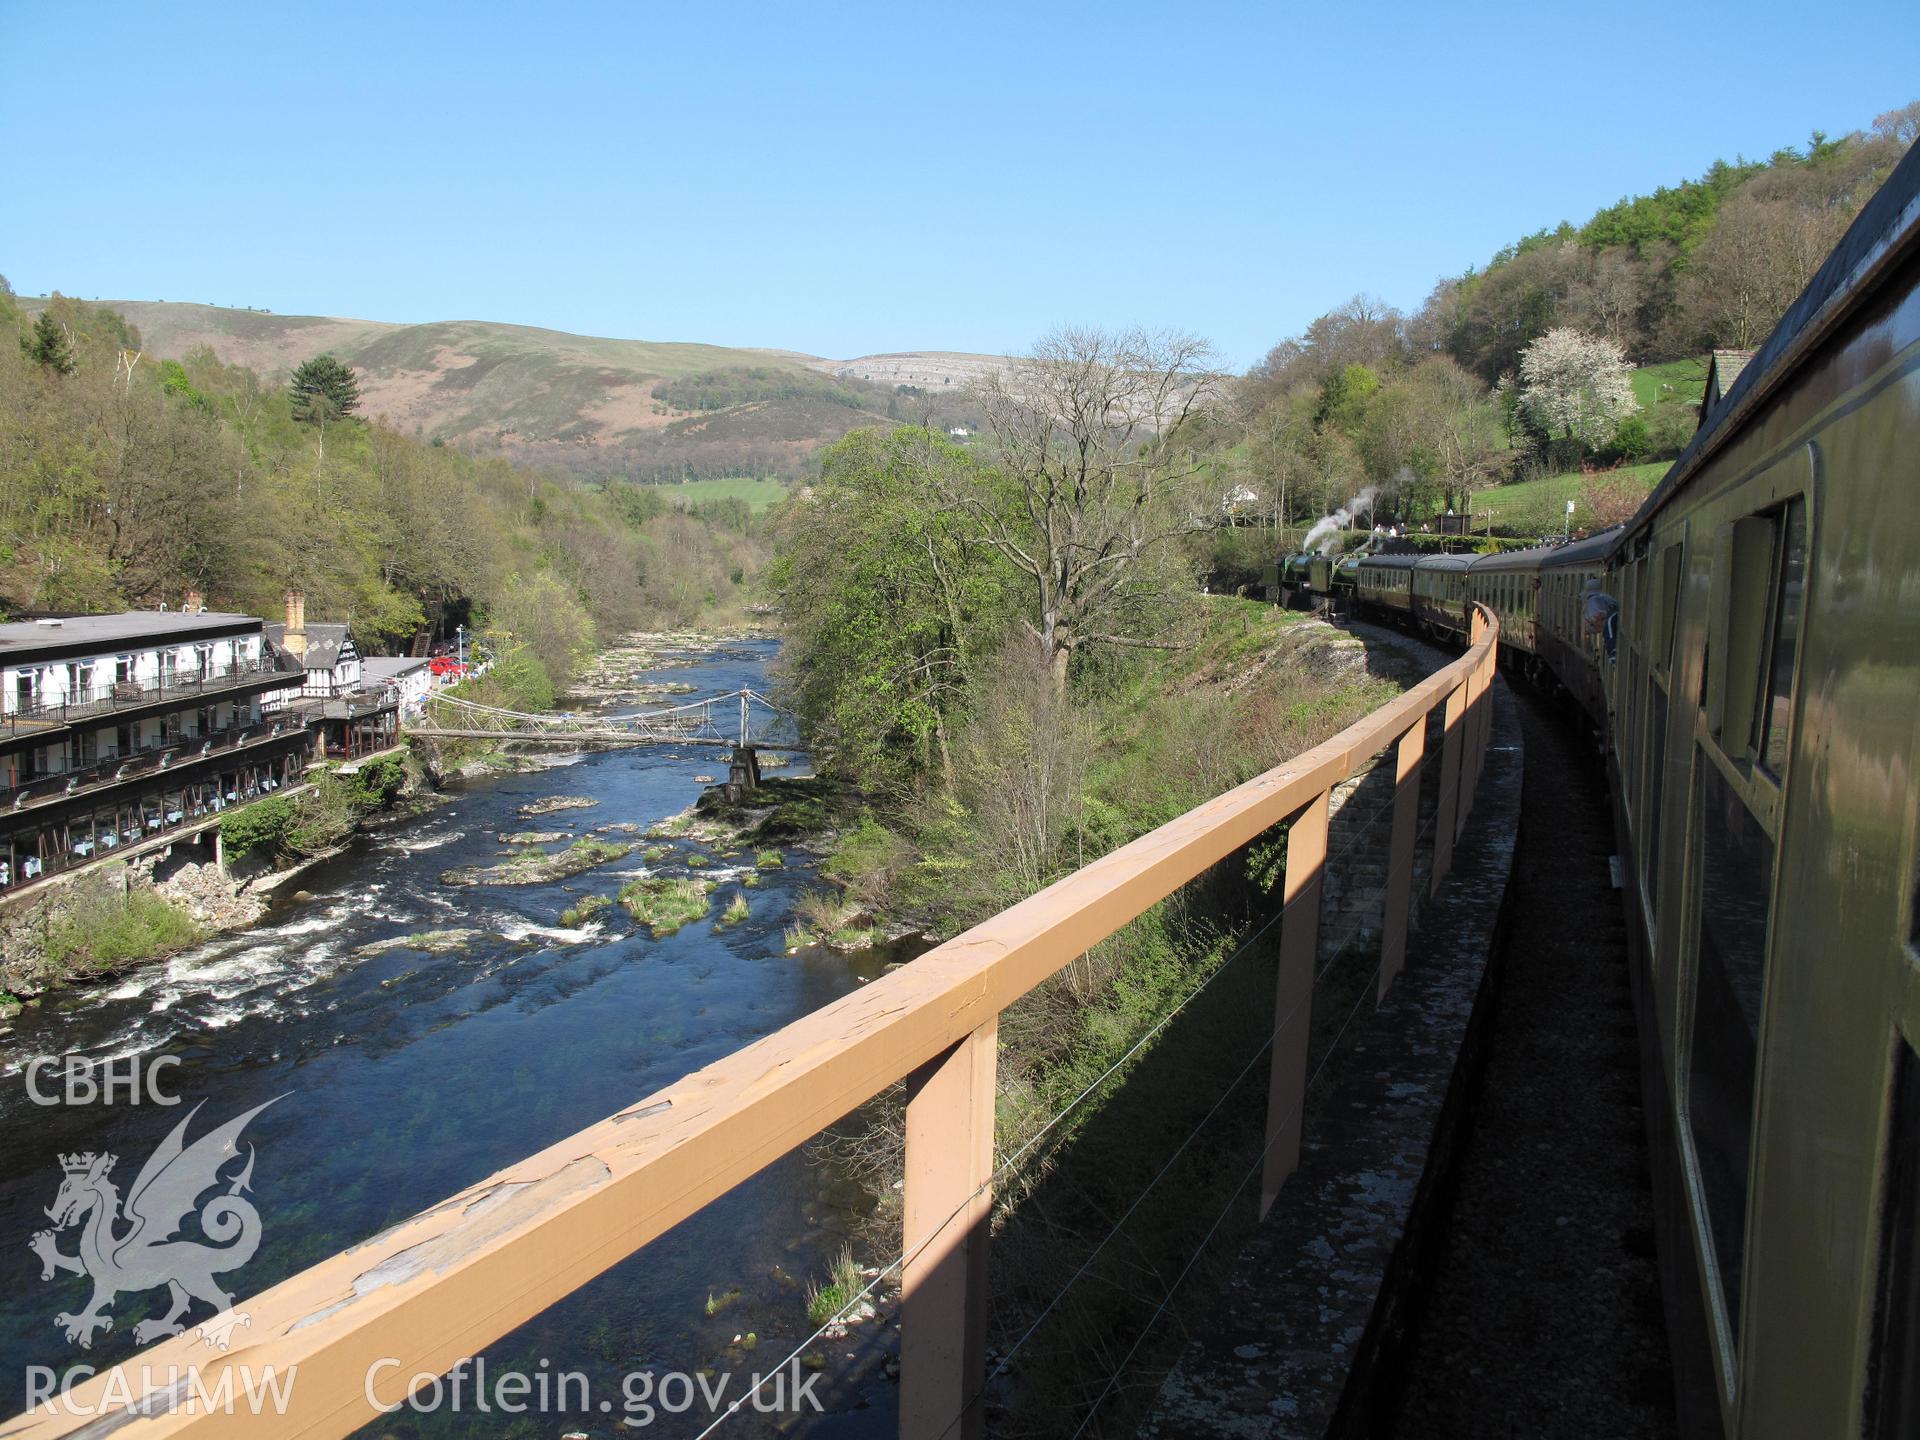 Llantisilio Chain Bridge from the southwest, taken by Brian Malaws on 19 April 2009.